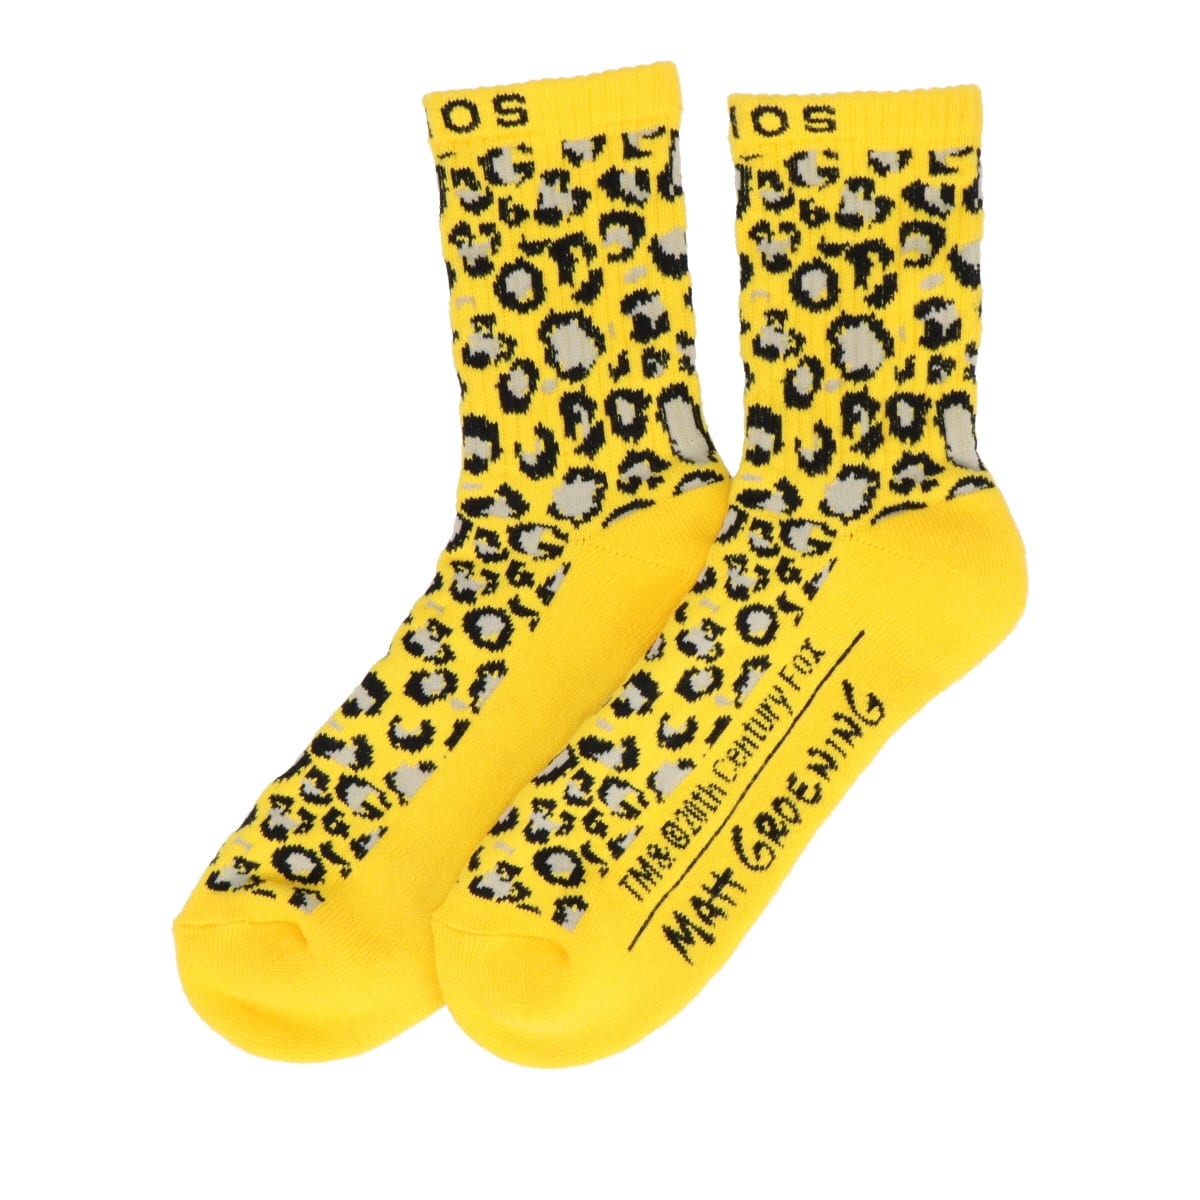 THE SIMPSONS x atmos LEOPARD SOCKS YELLOW 21SP-I_photo_large